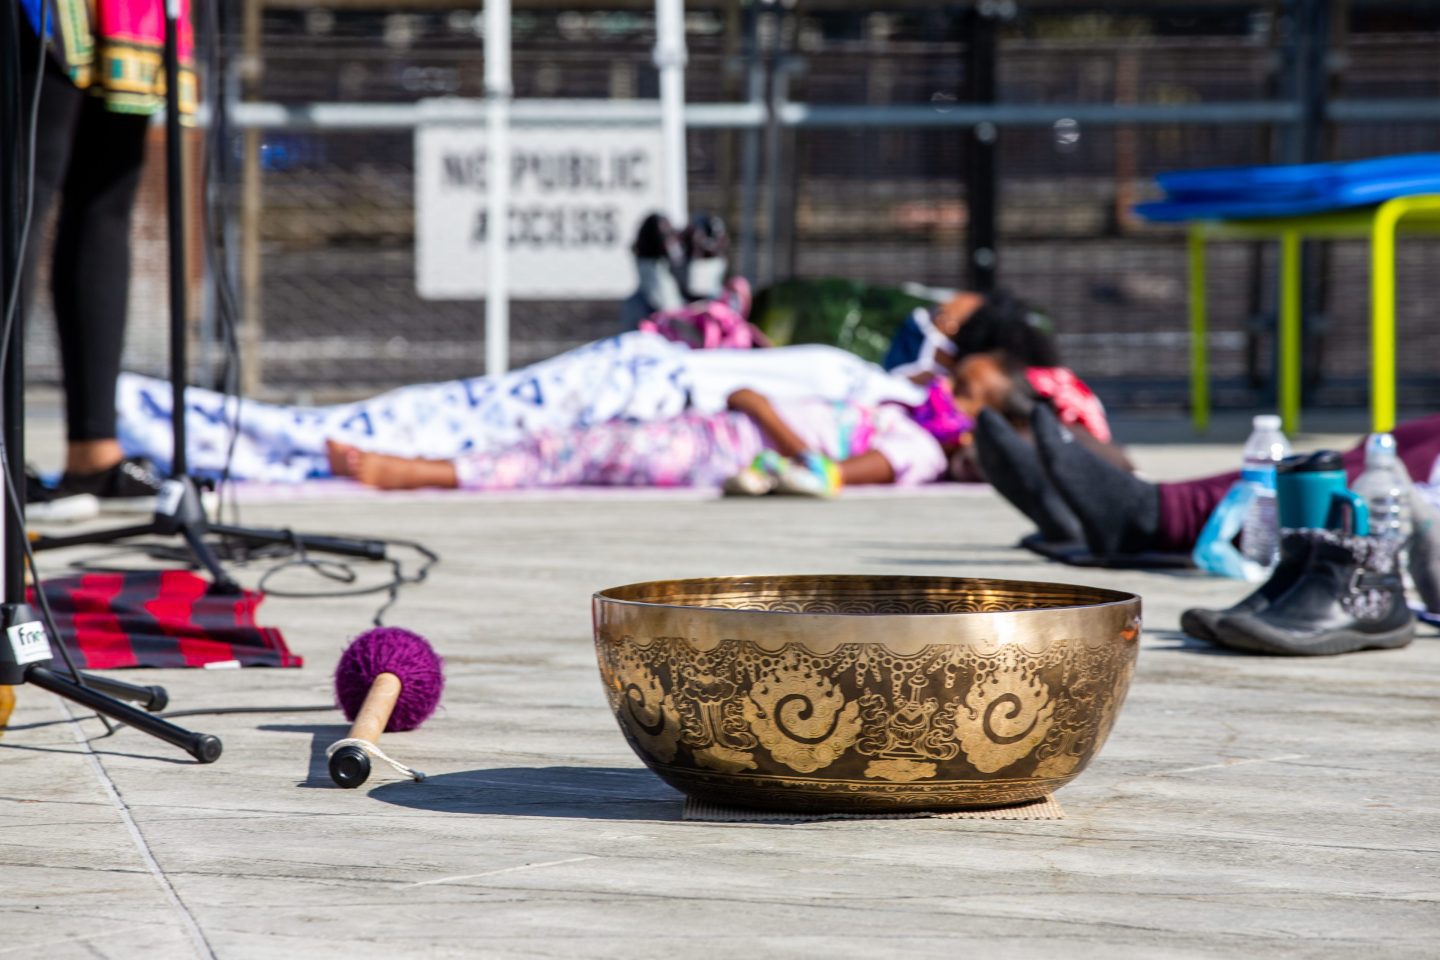 An engraved golden bowl sits on a boardwalk, meditation attendees are visible but blurry in the background, they are lying on the ground.